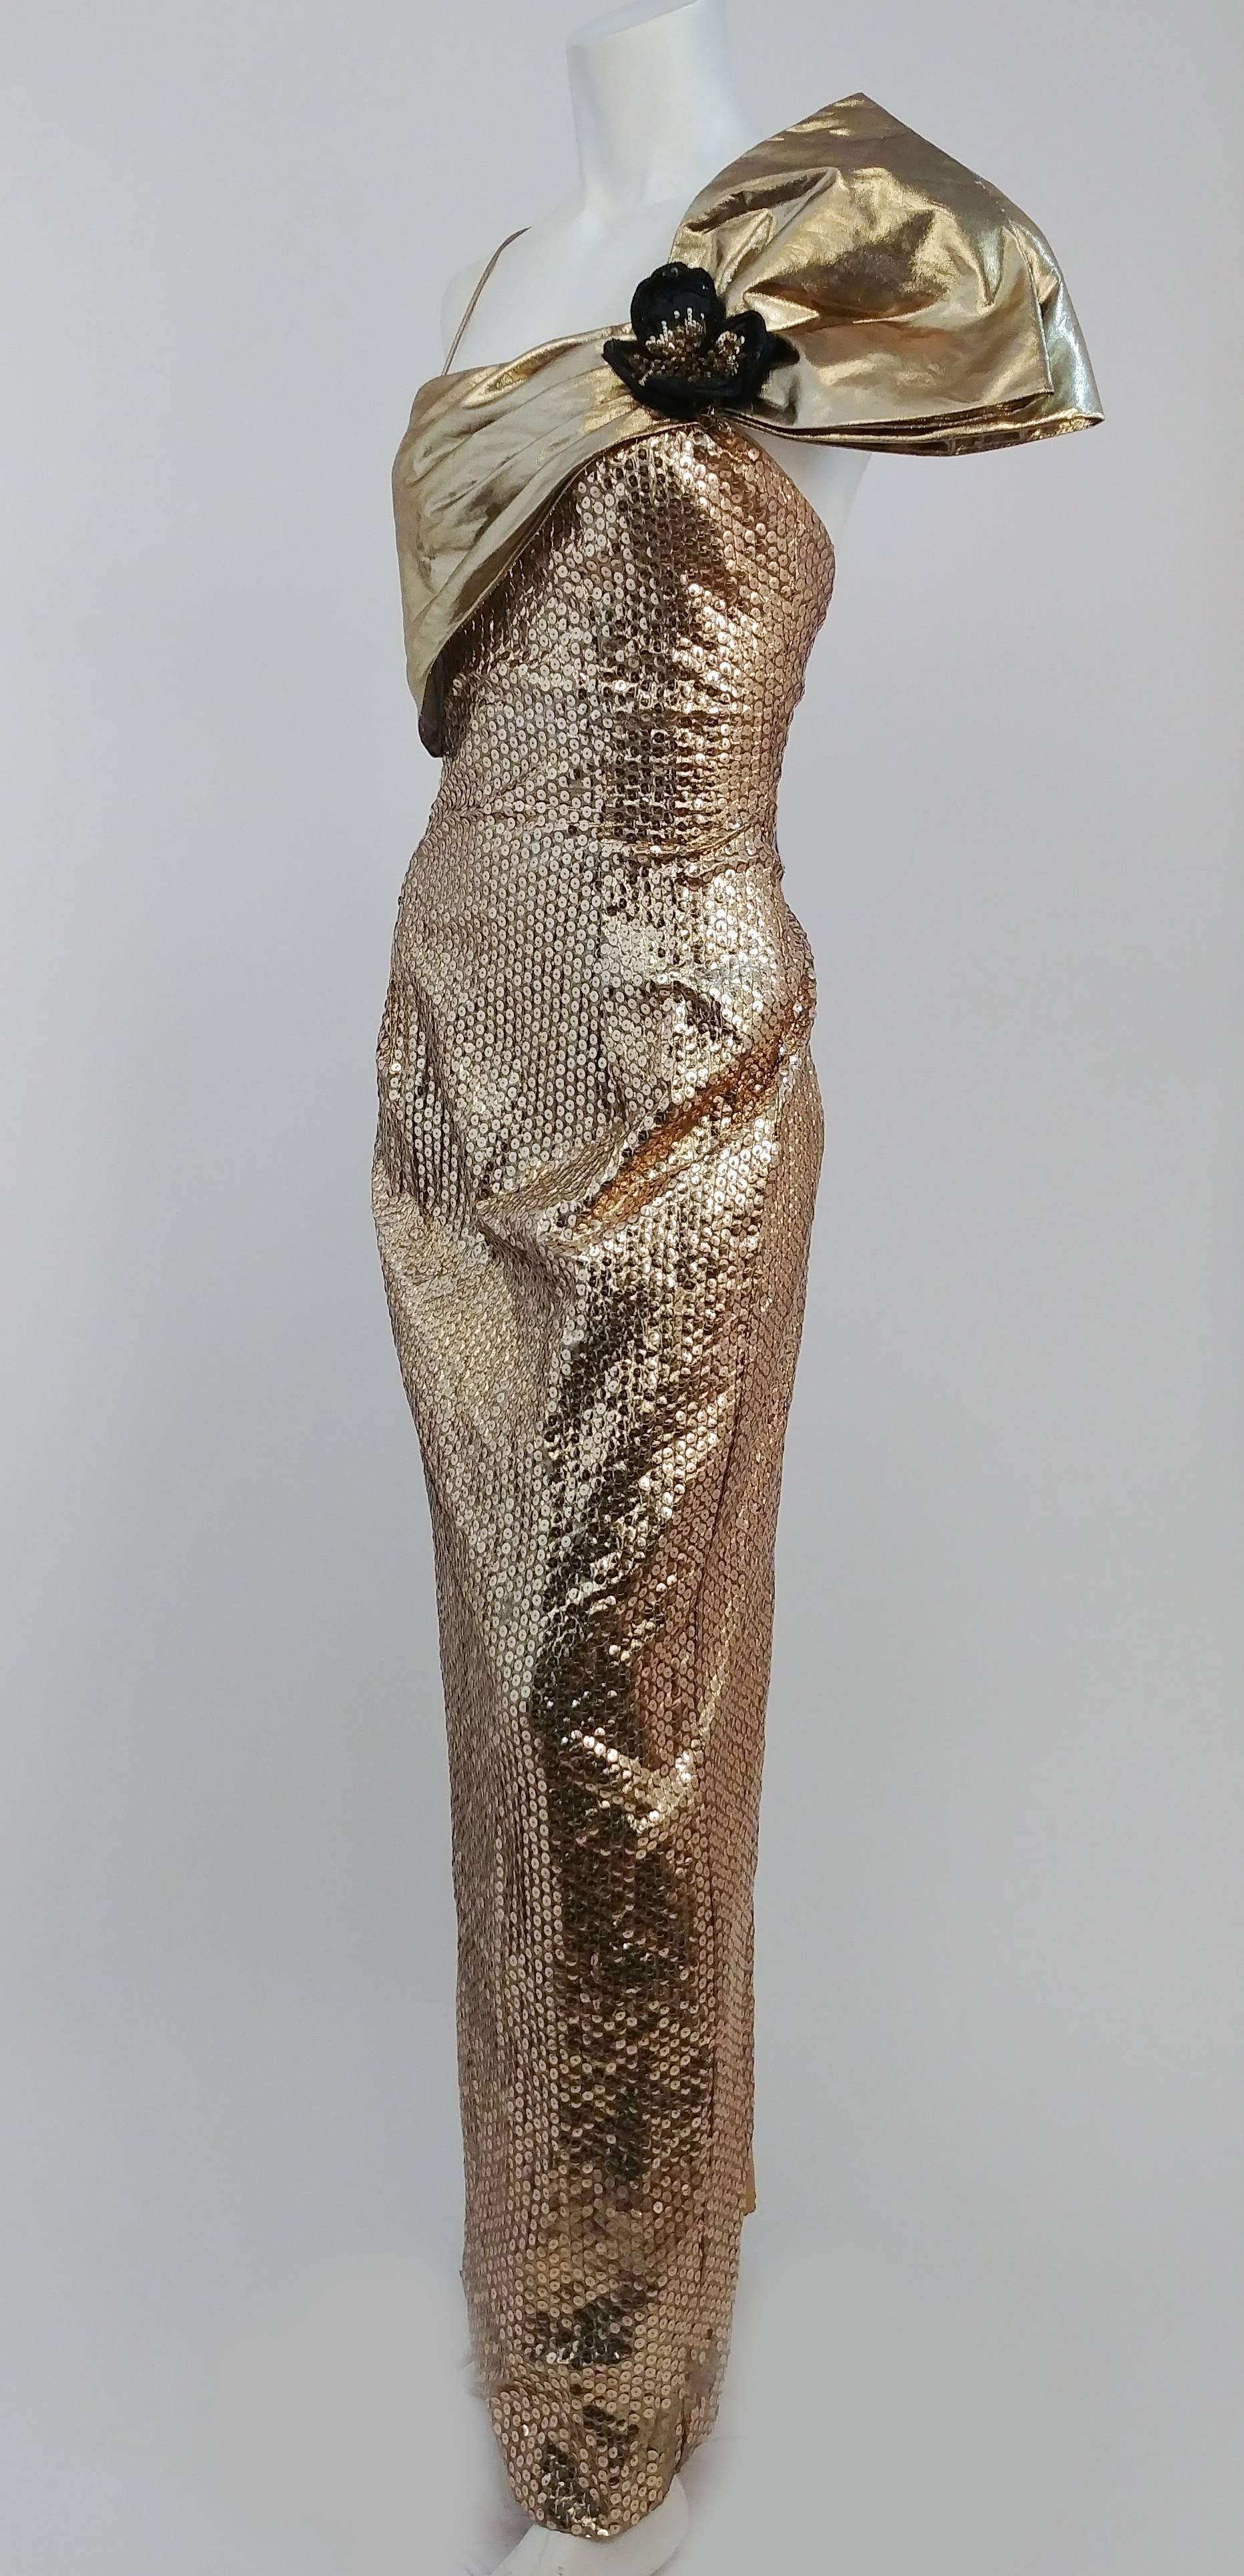 1980s Gold Metallic Sequin Party Dress w/ Bow. All-over sequins cover dress, with lamé fabric forming a large bow over the shoulder. Criss-cross low back. 